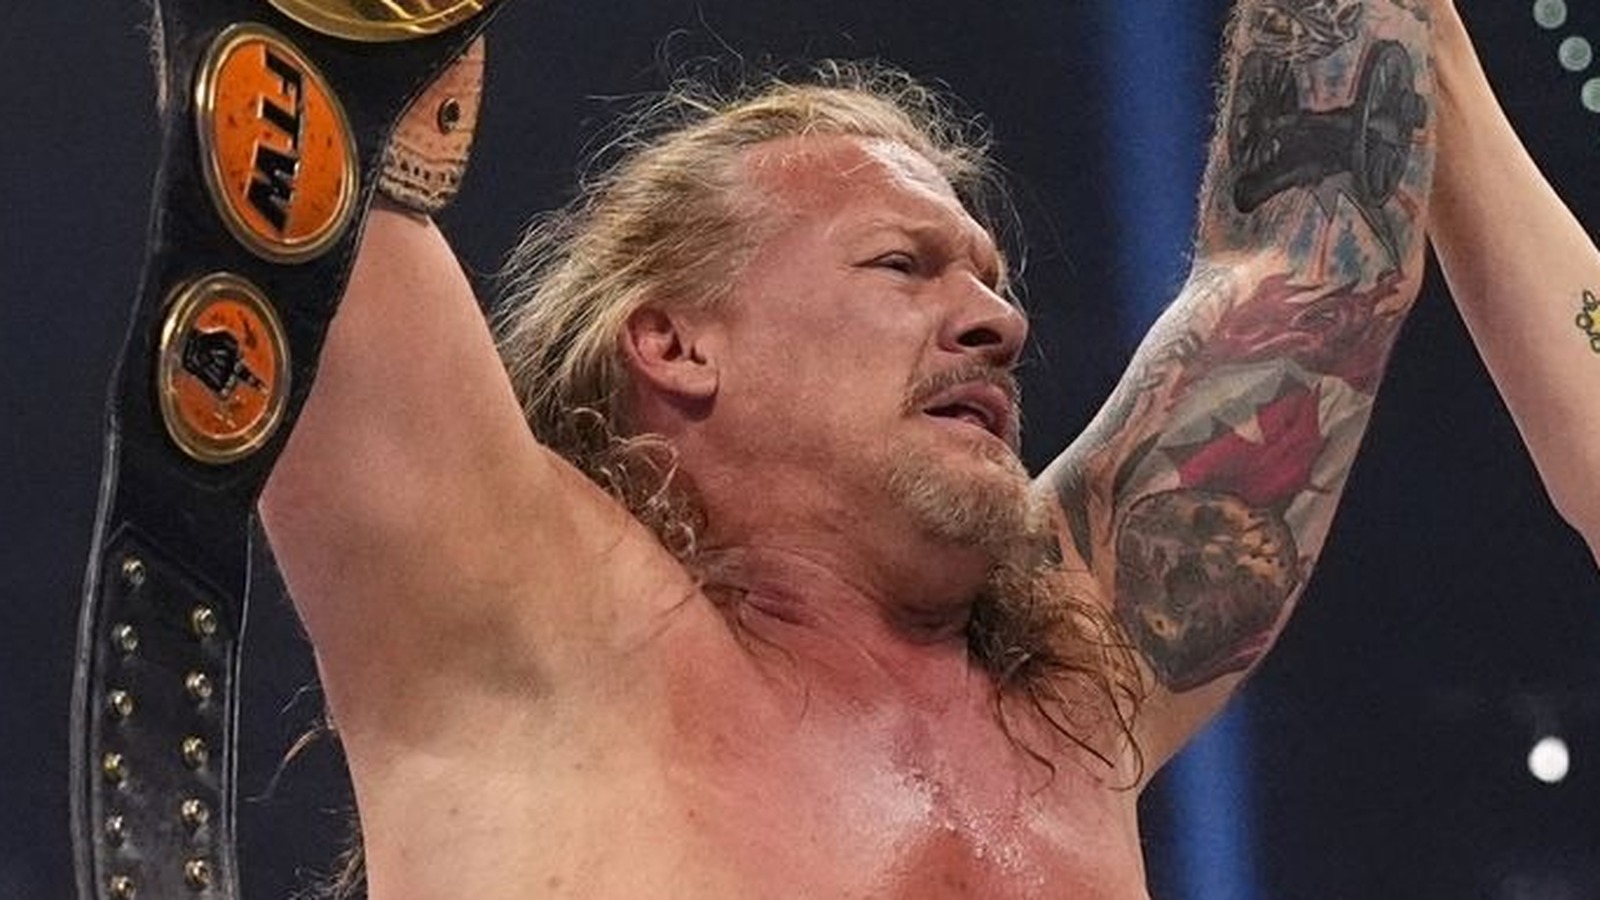 Chris Jericho To Get 'TV Time' On AEW Dynamite